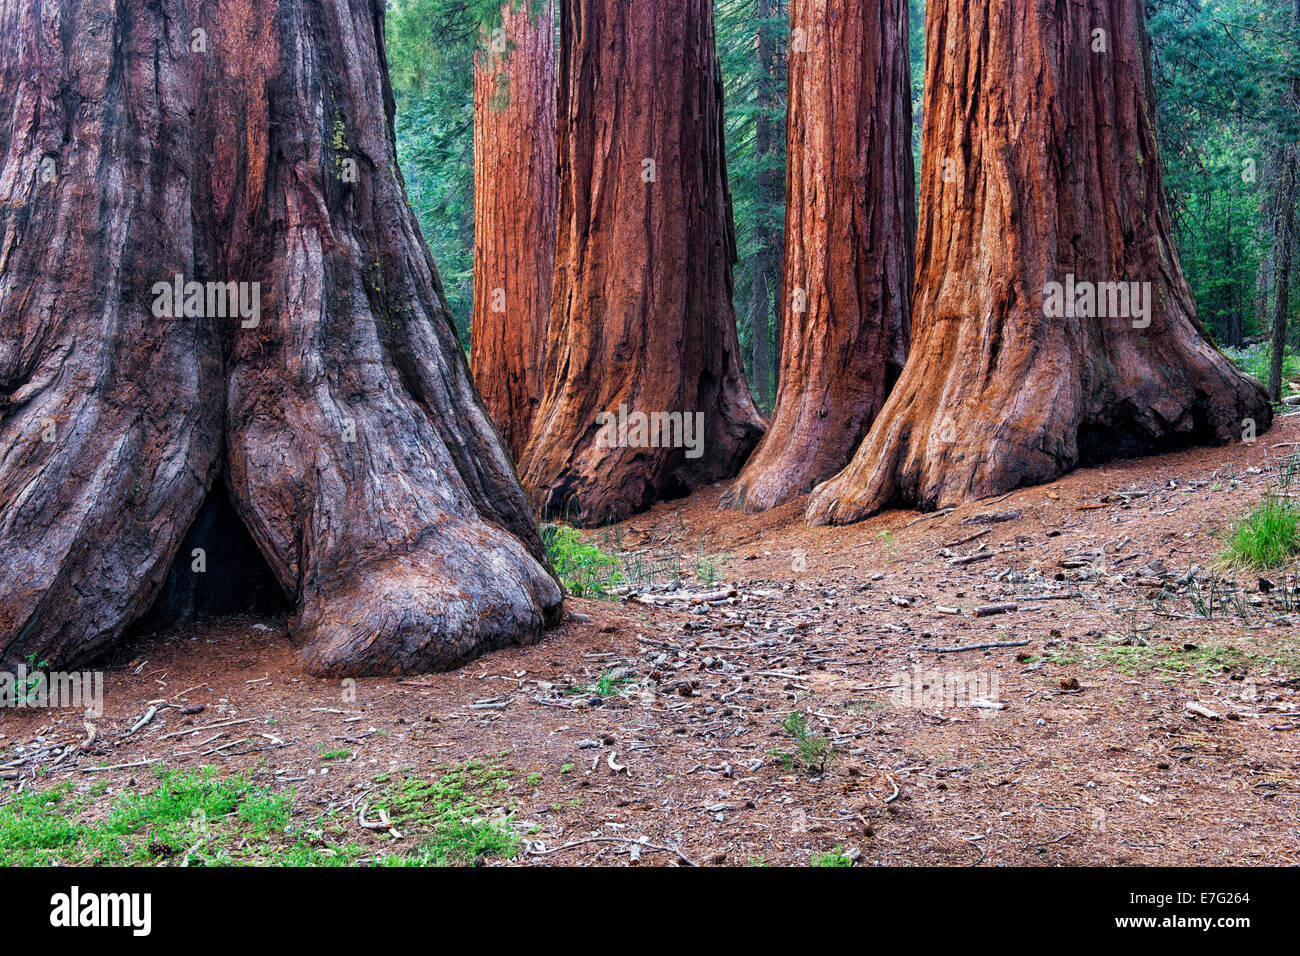 The Mariposa Grove of Giant Sequoia Trees in California’s Yosemite National Park include the Bachelor and Three Graces. Stock Photo